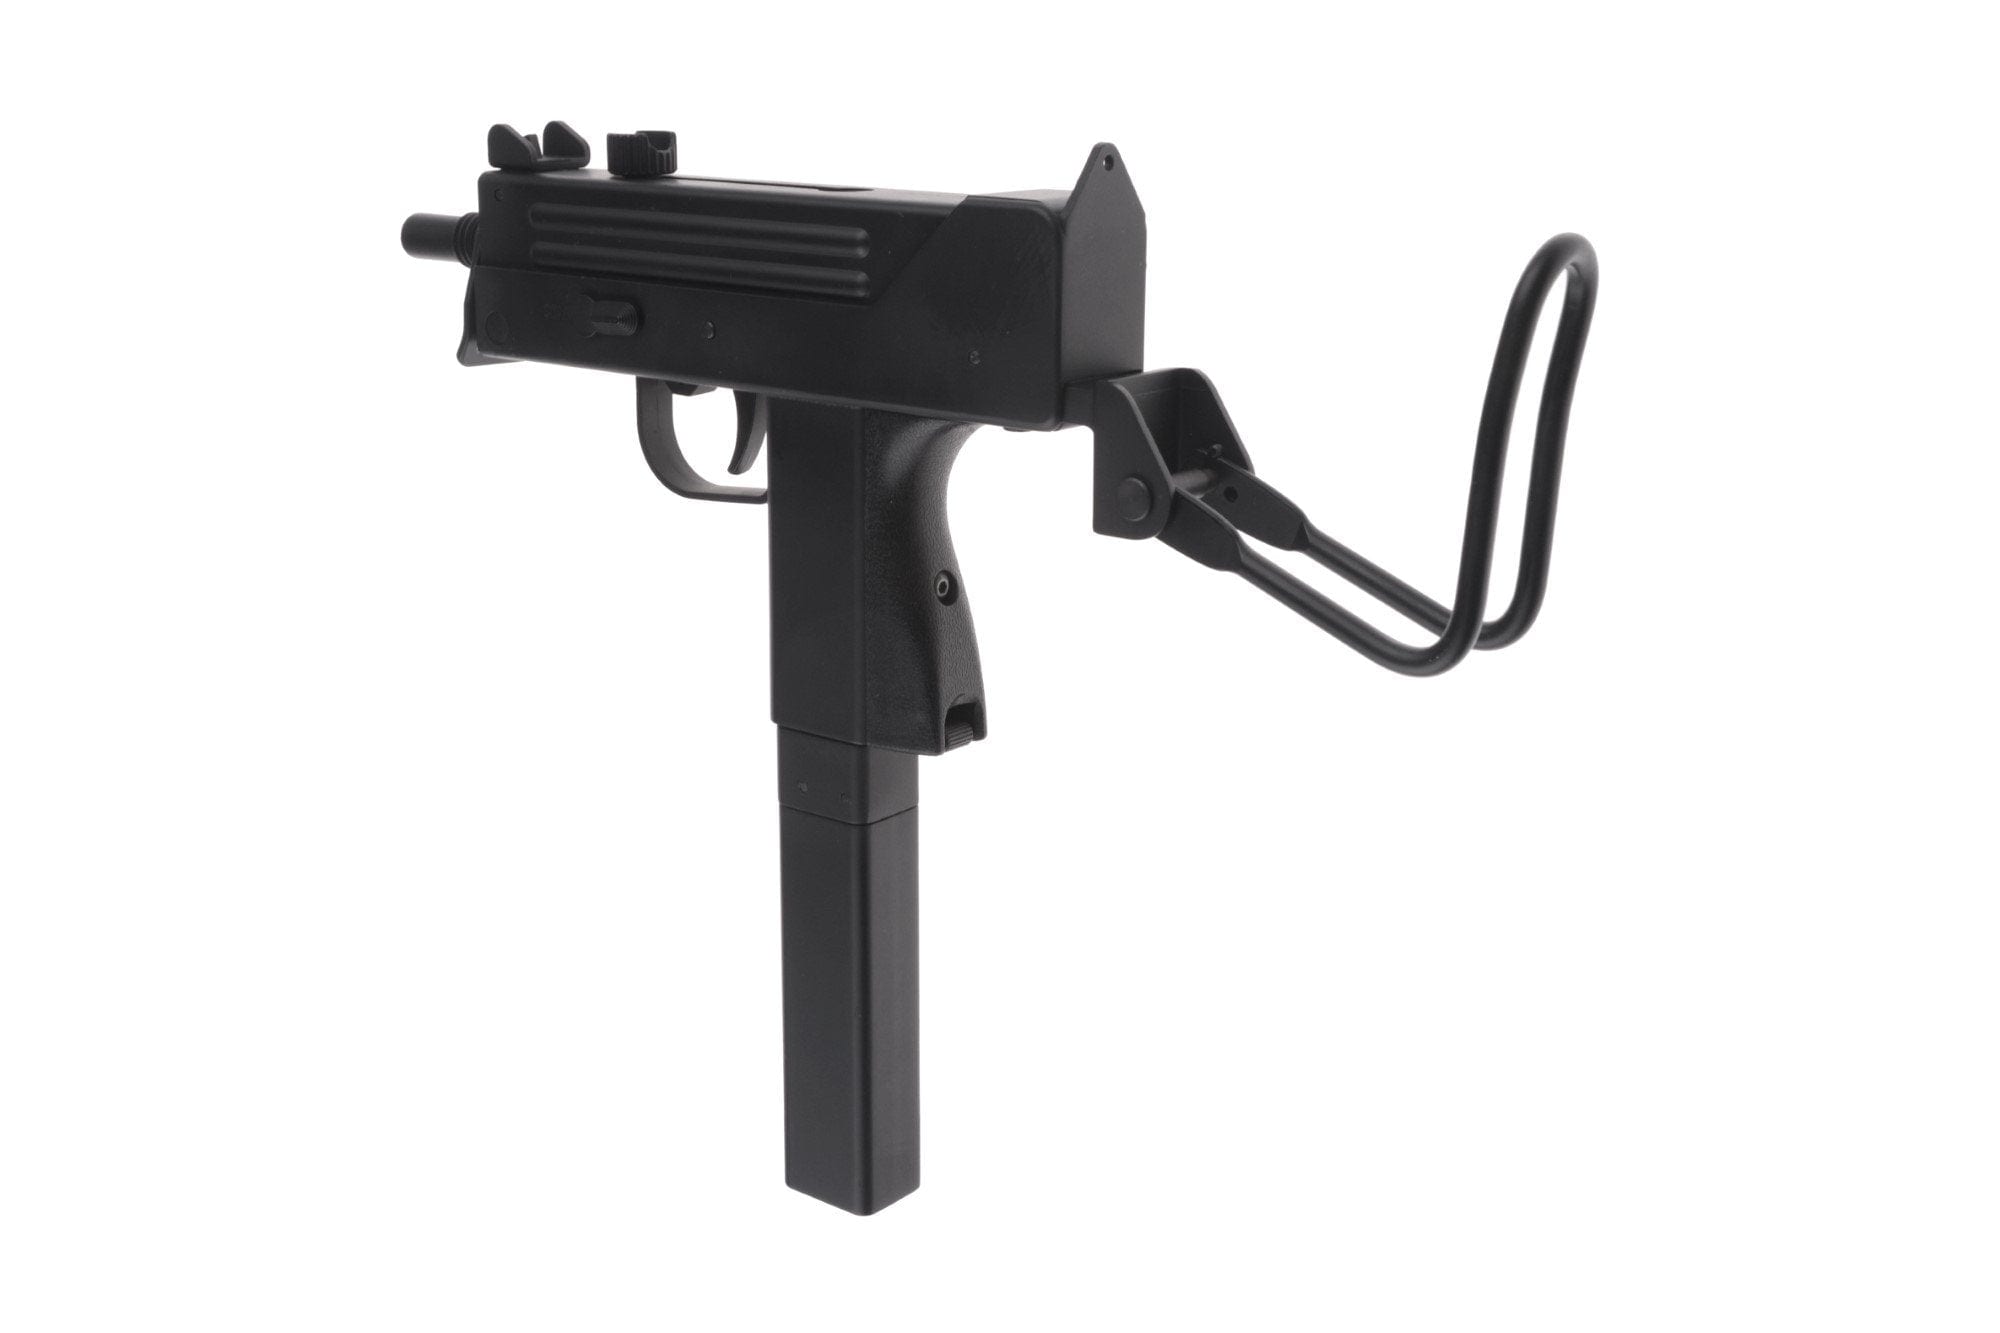 G12 (CO2) submachine gun Replica by WELL on Airsoft Mania Europe